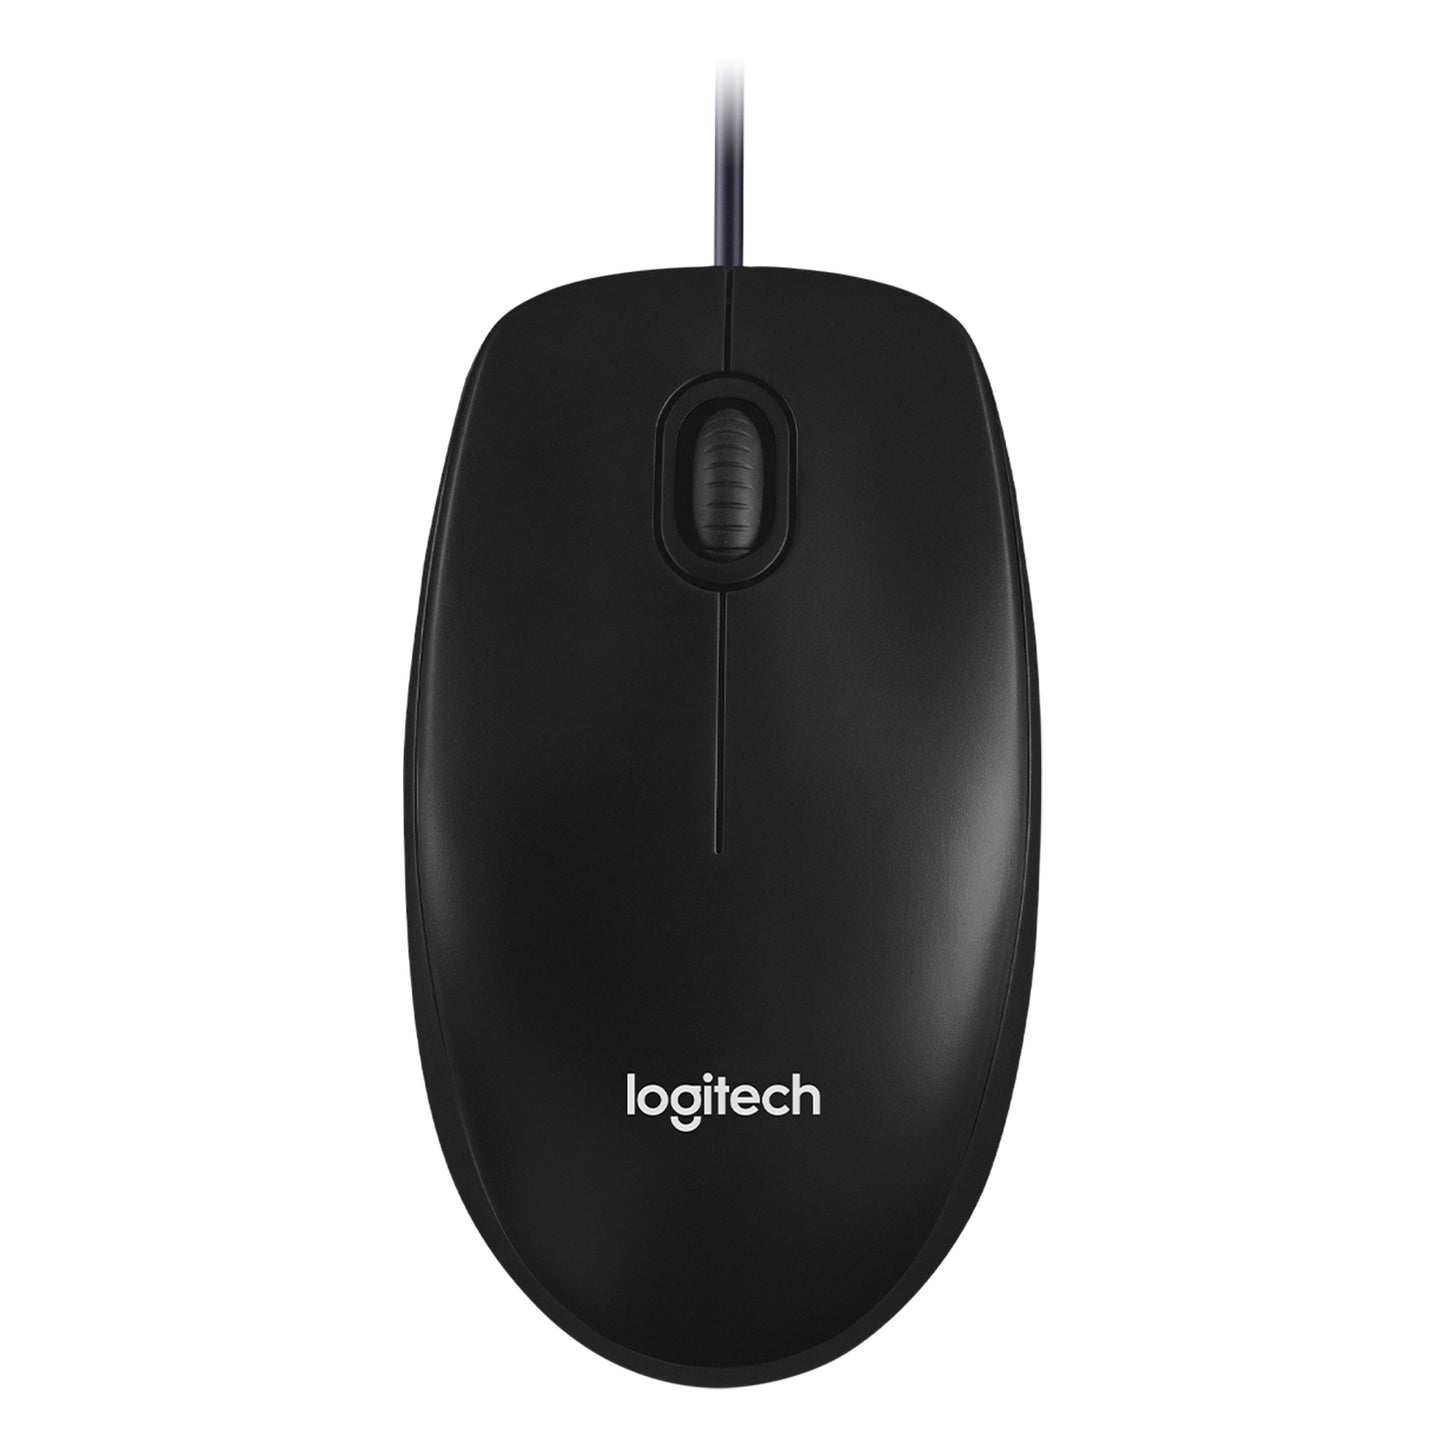 Logitech M100R Optical Wired USB Mouse with 1000 DPI, 3 Buttons, Ambidextrous Full Size Design for PC Computer (Black)